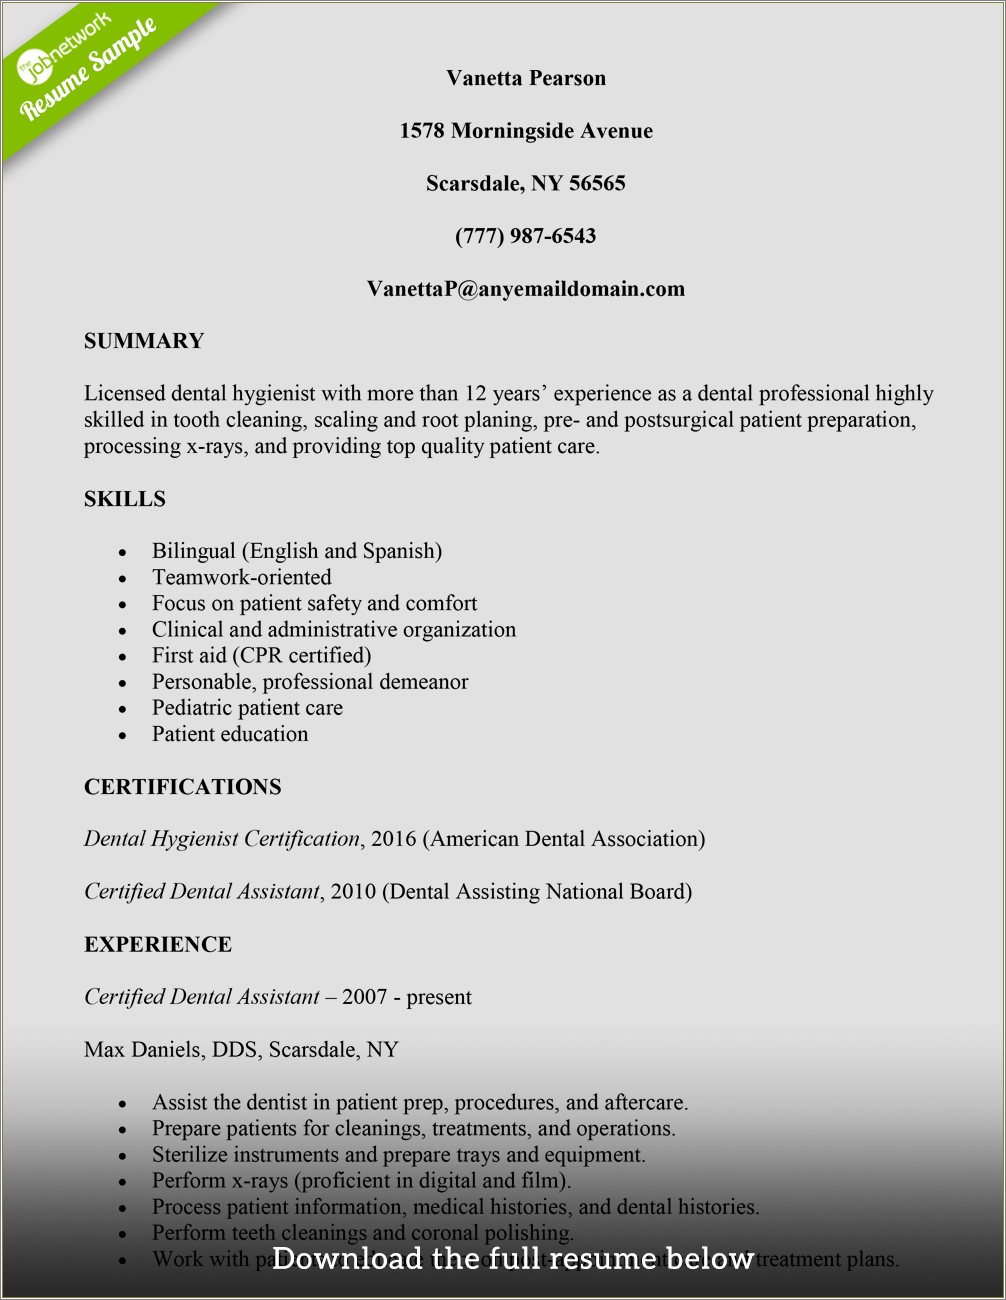 Resume Professional Summary For Dental Assistant